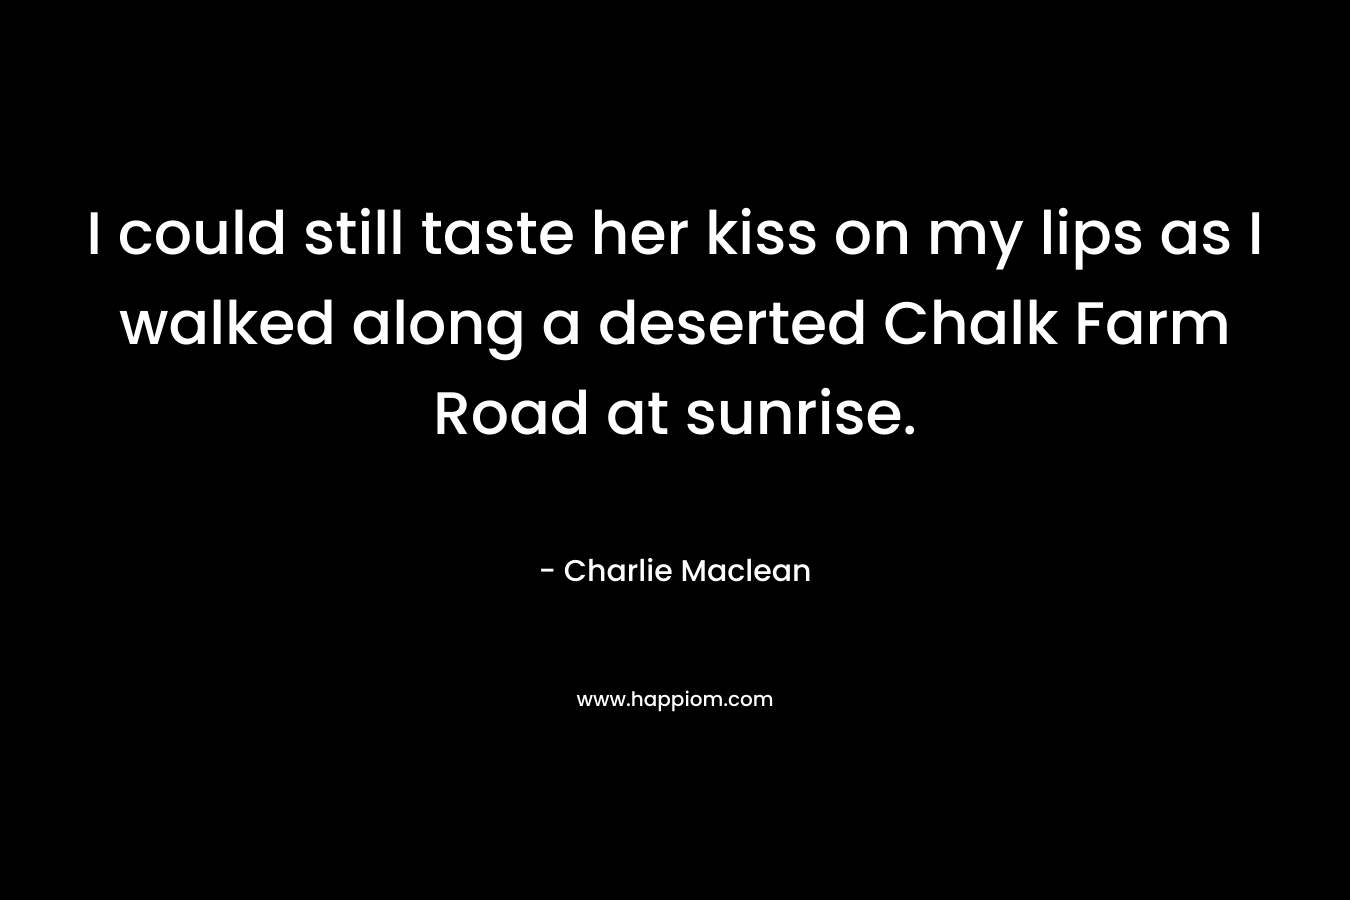 I could still taste her kiss on my lips as I walked along a deserted Chalk Farm Road at sunrise. – Charlie Maclean